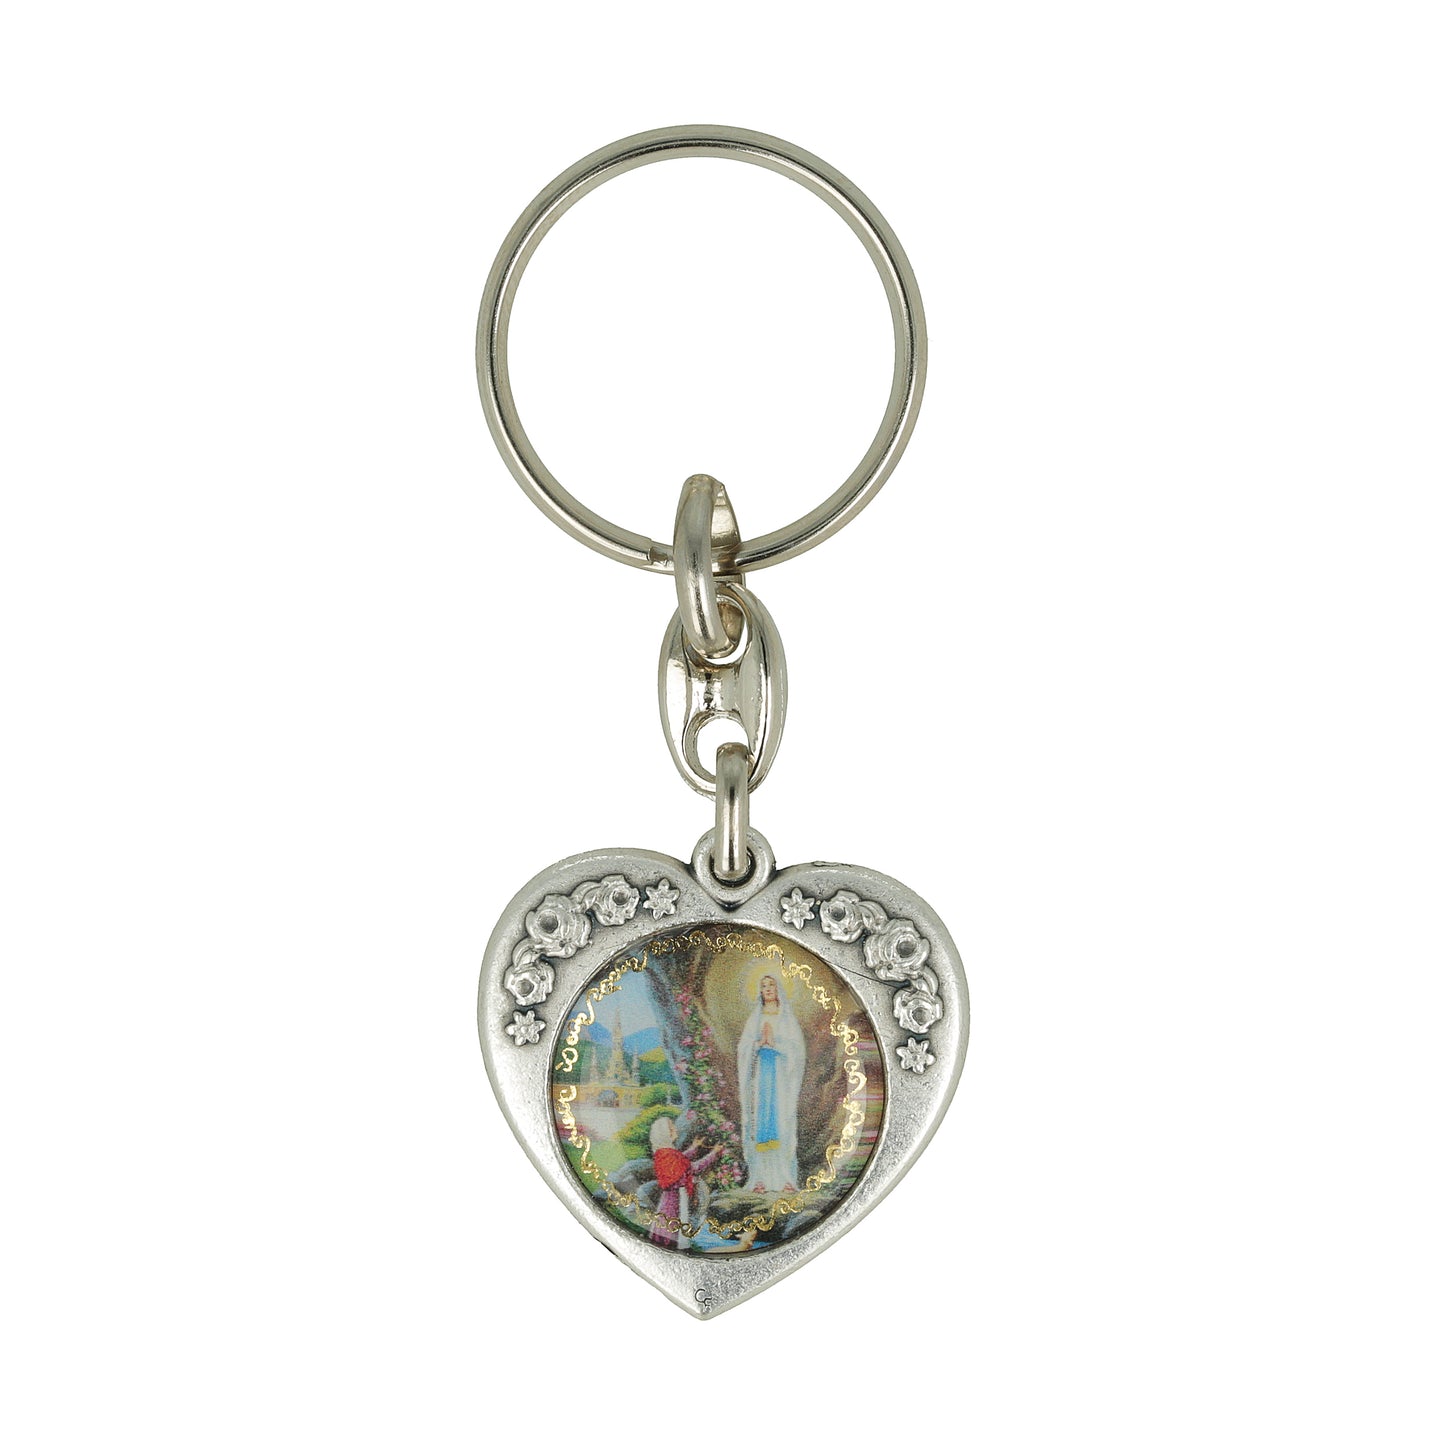 Keychain Heart V. of Lourdes Pray for Us. Souvenirs from Italy